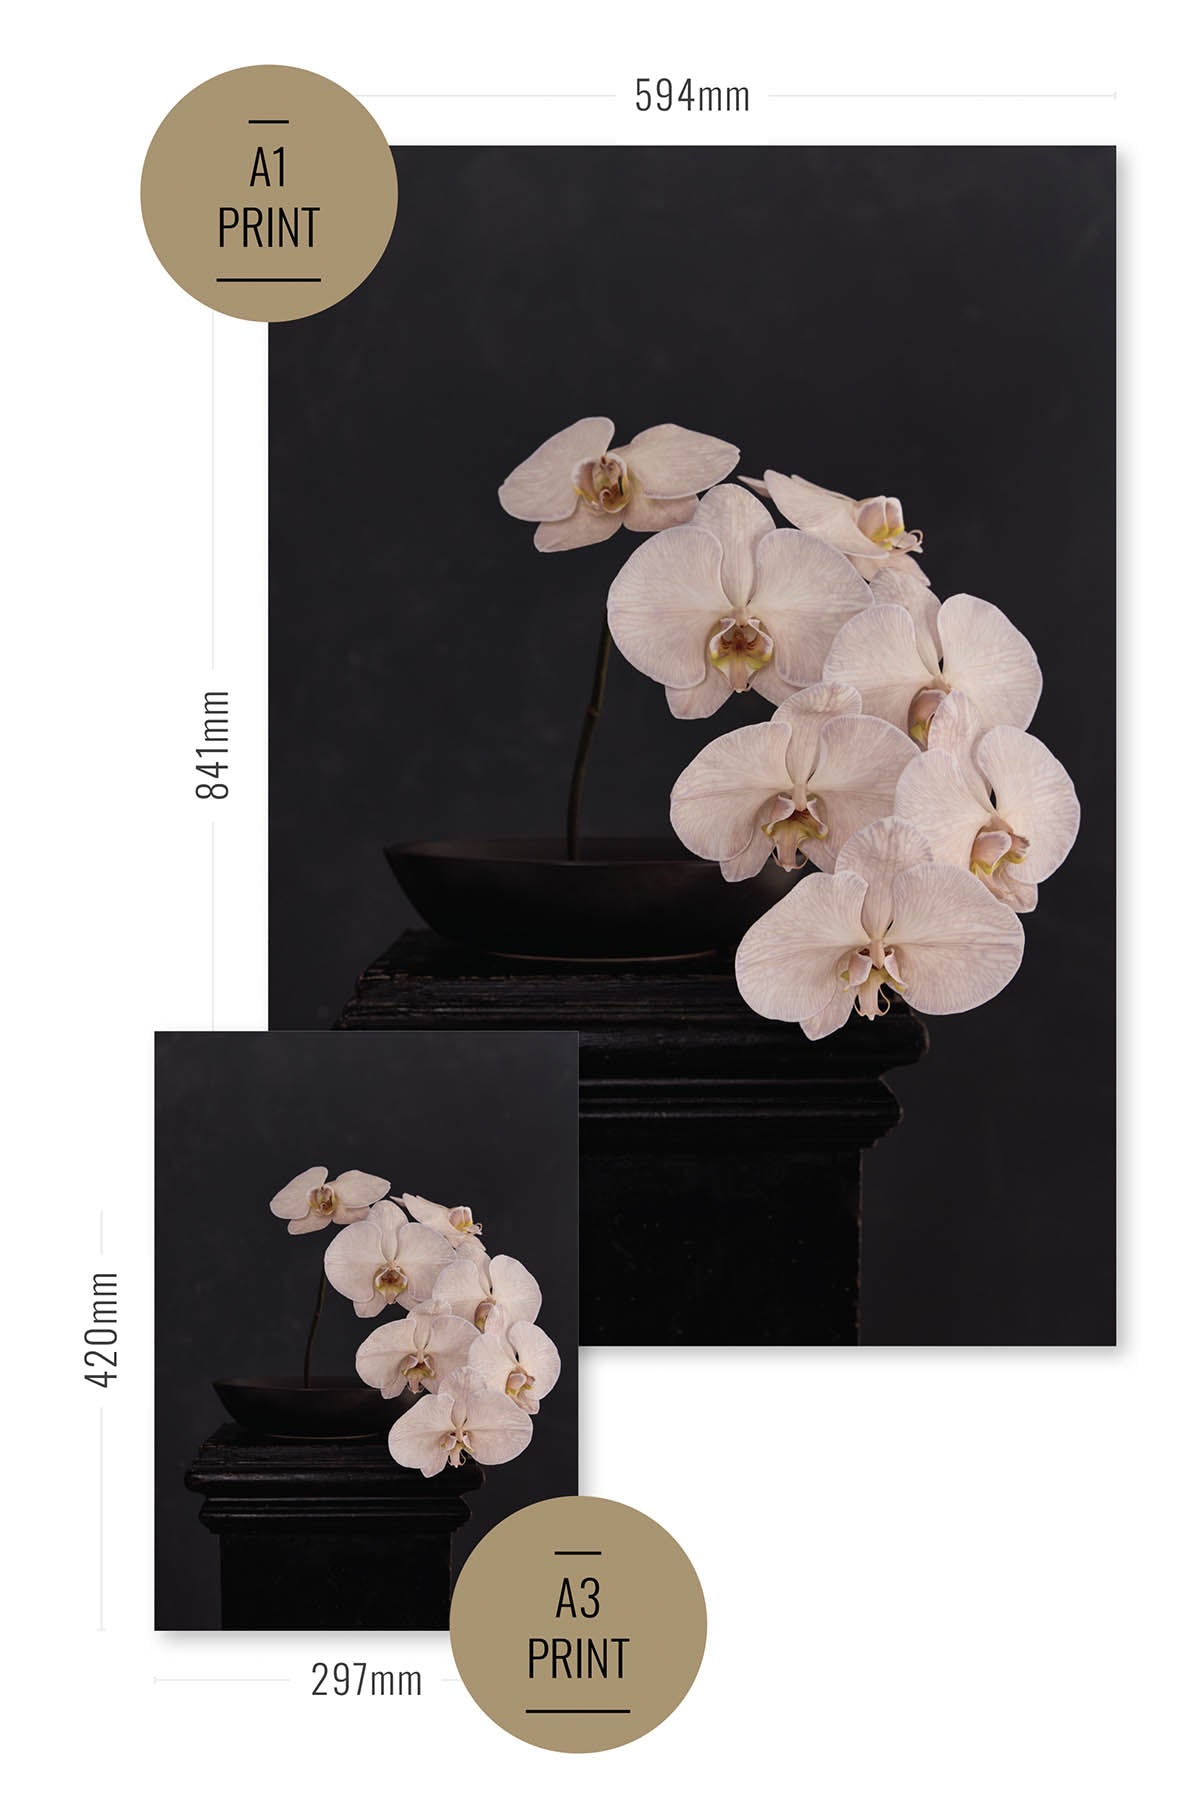 Fine Art Print Of A White Phaleanopsis Stem In A Black Bowl On A Black Mantle With A Black Rustic Background Size Comparison Chart